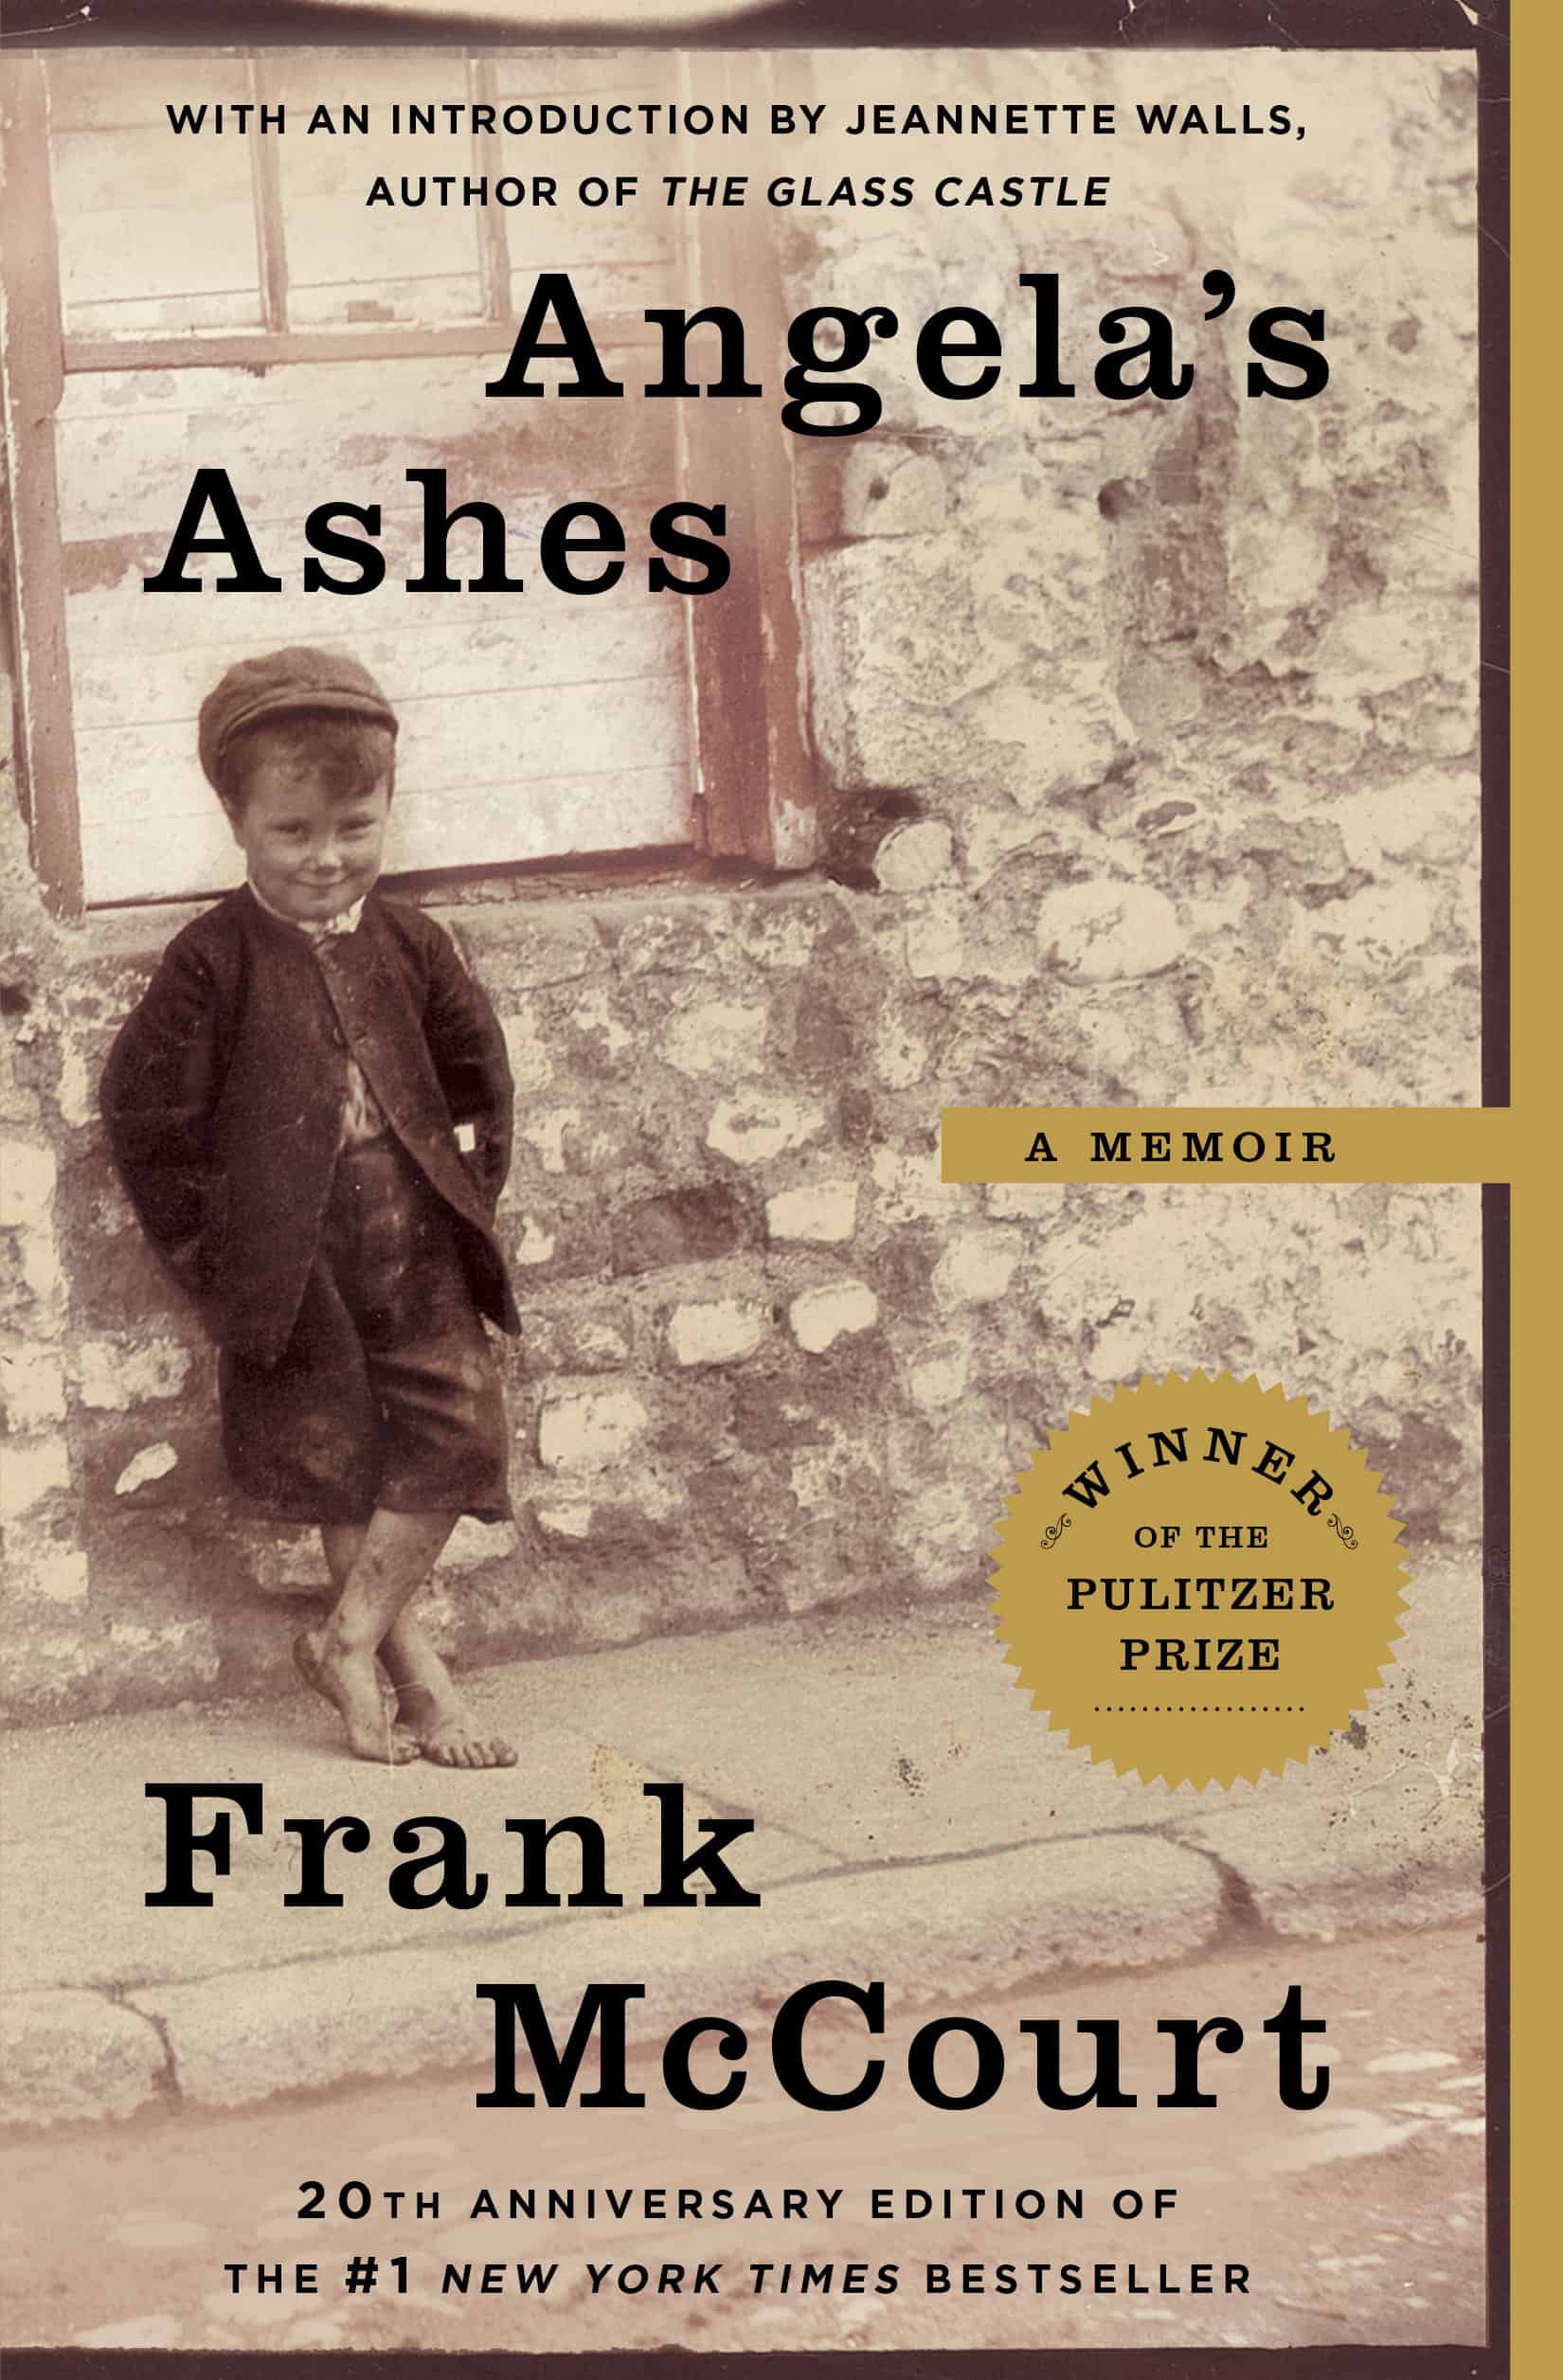 <ul> <li><strong>Runtime:</strong> 15 hours, 8 minutes</li>    <li><strong>Author & Narrator:</strong> Frank McCourt</li> </ul>    <p><em>Angela's Ashes</em> by Frank McCourt is a beloved audiobook that captures the hardships and triumphs of a young boy growing up in poverty-stricken Ireland. Interestingly enough, this audiobook is read by its author. The <em>Angela's Ashes</em> audiobook proves that it can be a real treat when the author takes on narration duties. <a href="https://www.reddit.com/r/audiobooks/comments/11bd6yv/best_audiobook_that_you_have_ever_listened_to/" rel="noopener">Listeners</a> appreciate McCourt's honest and poignant storytelling, which immerses them in the raw emotions and vivid experiences of his childhood. After all, who better to do the narration than the book's narrator himself?</p>